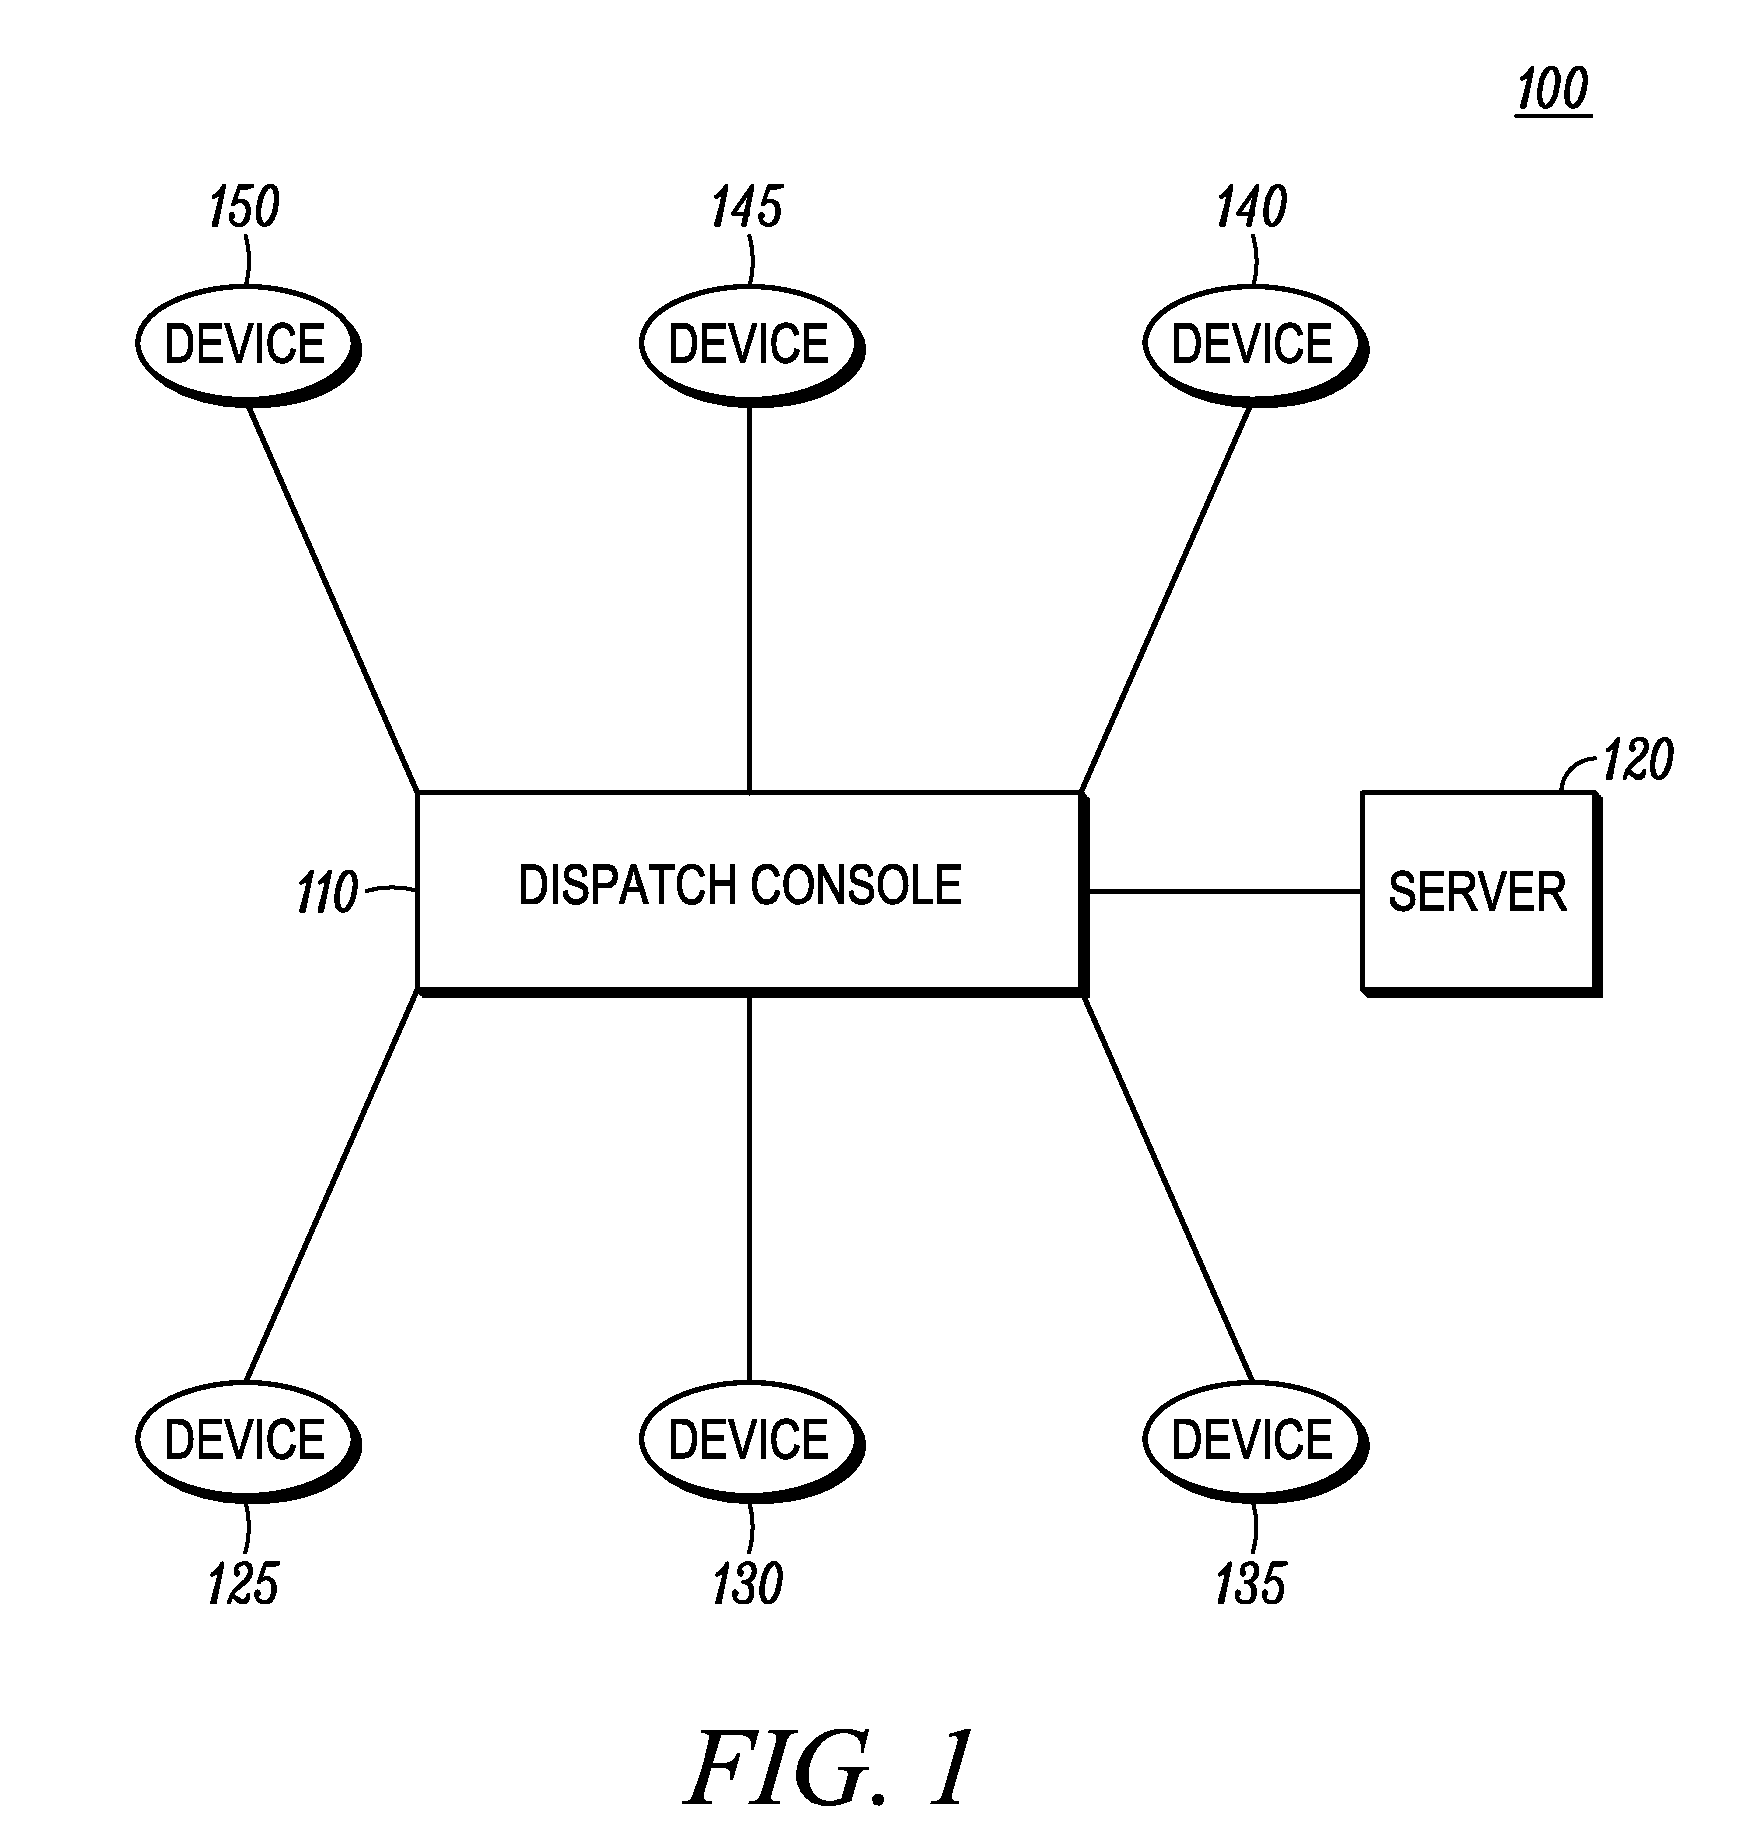 Method and system for operational improvements in dispatch console systems in a multi-source environment